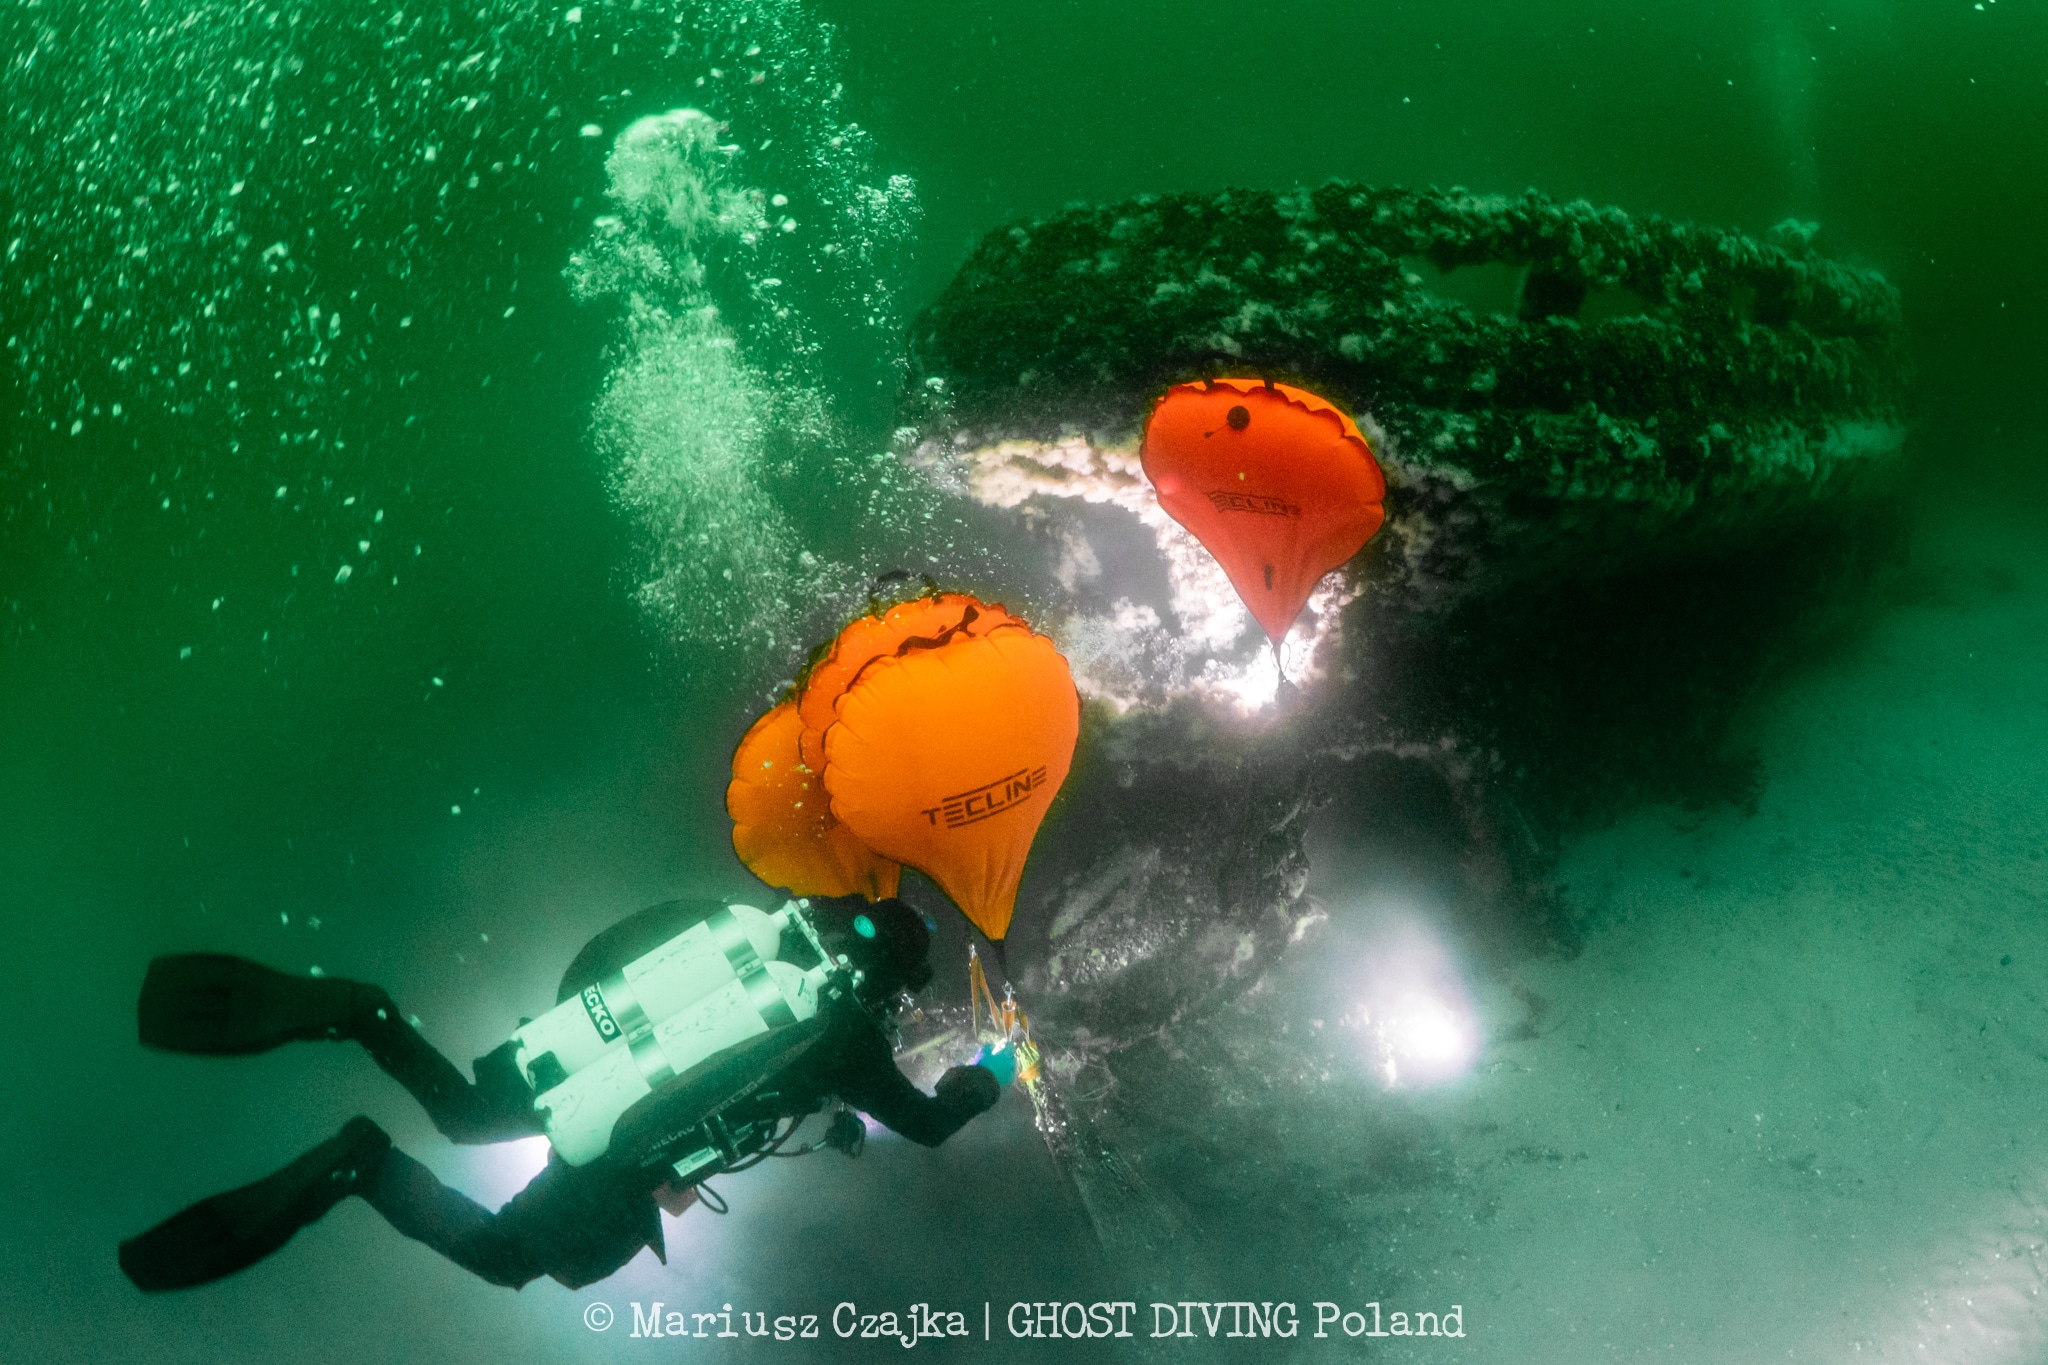 Divers extract nets with the help of lifting bags